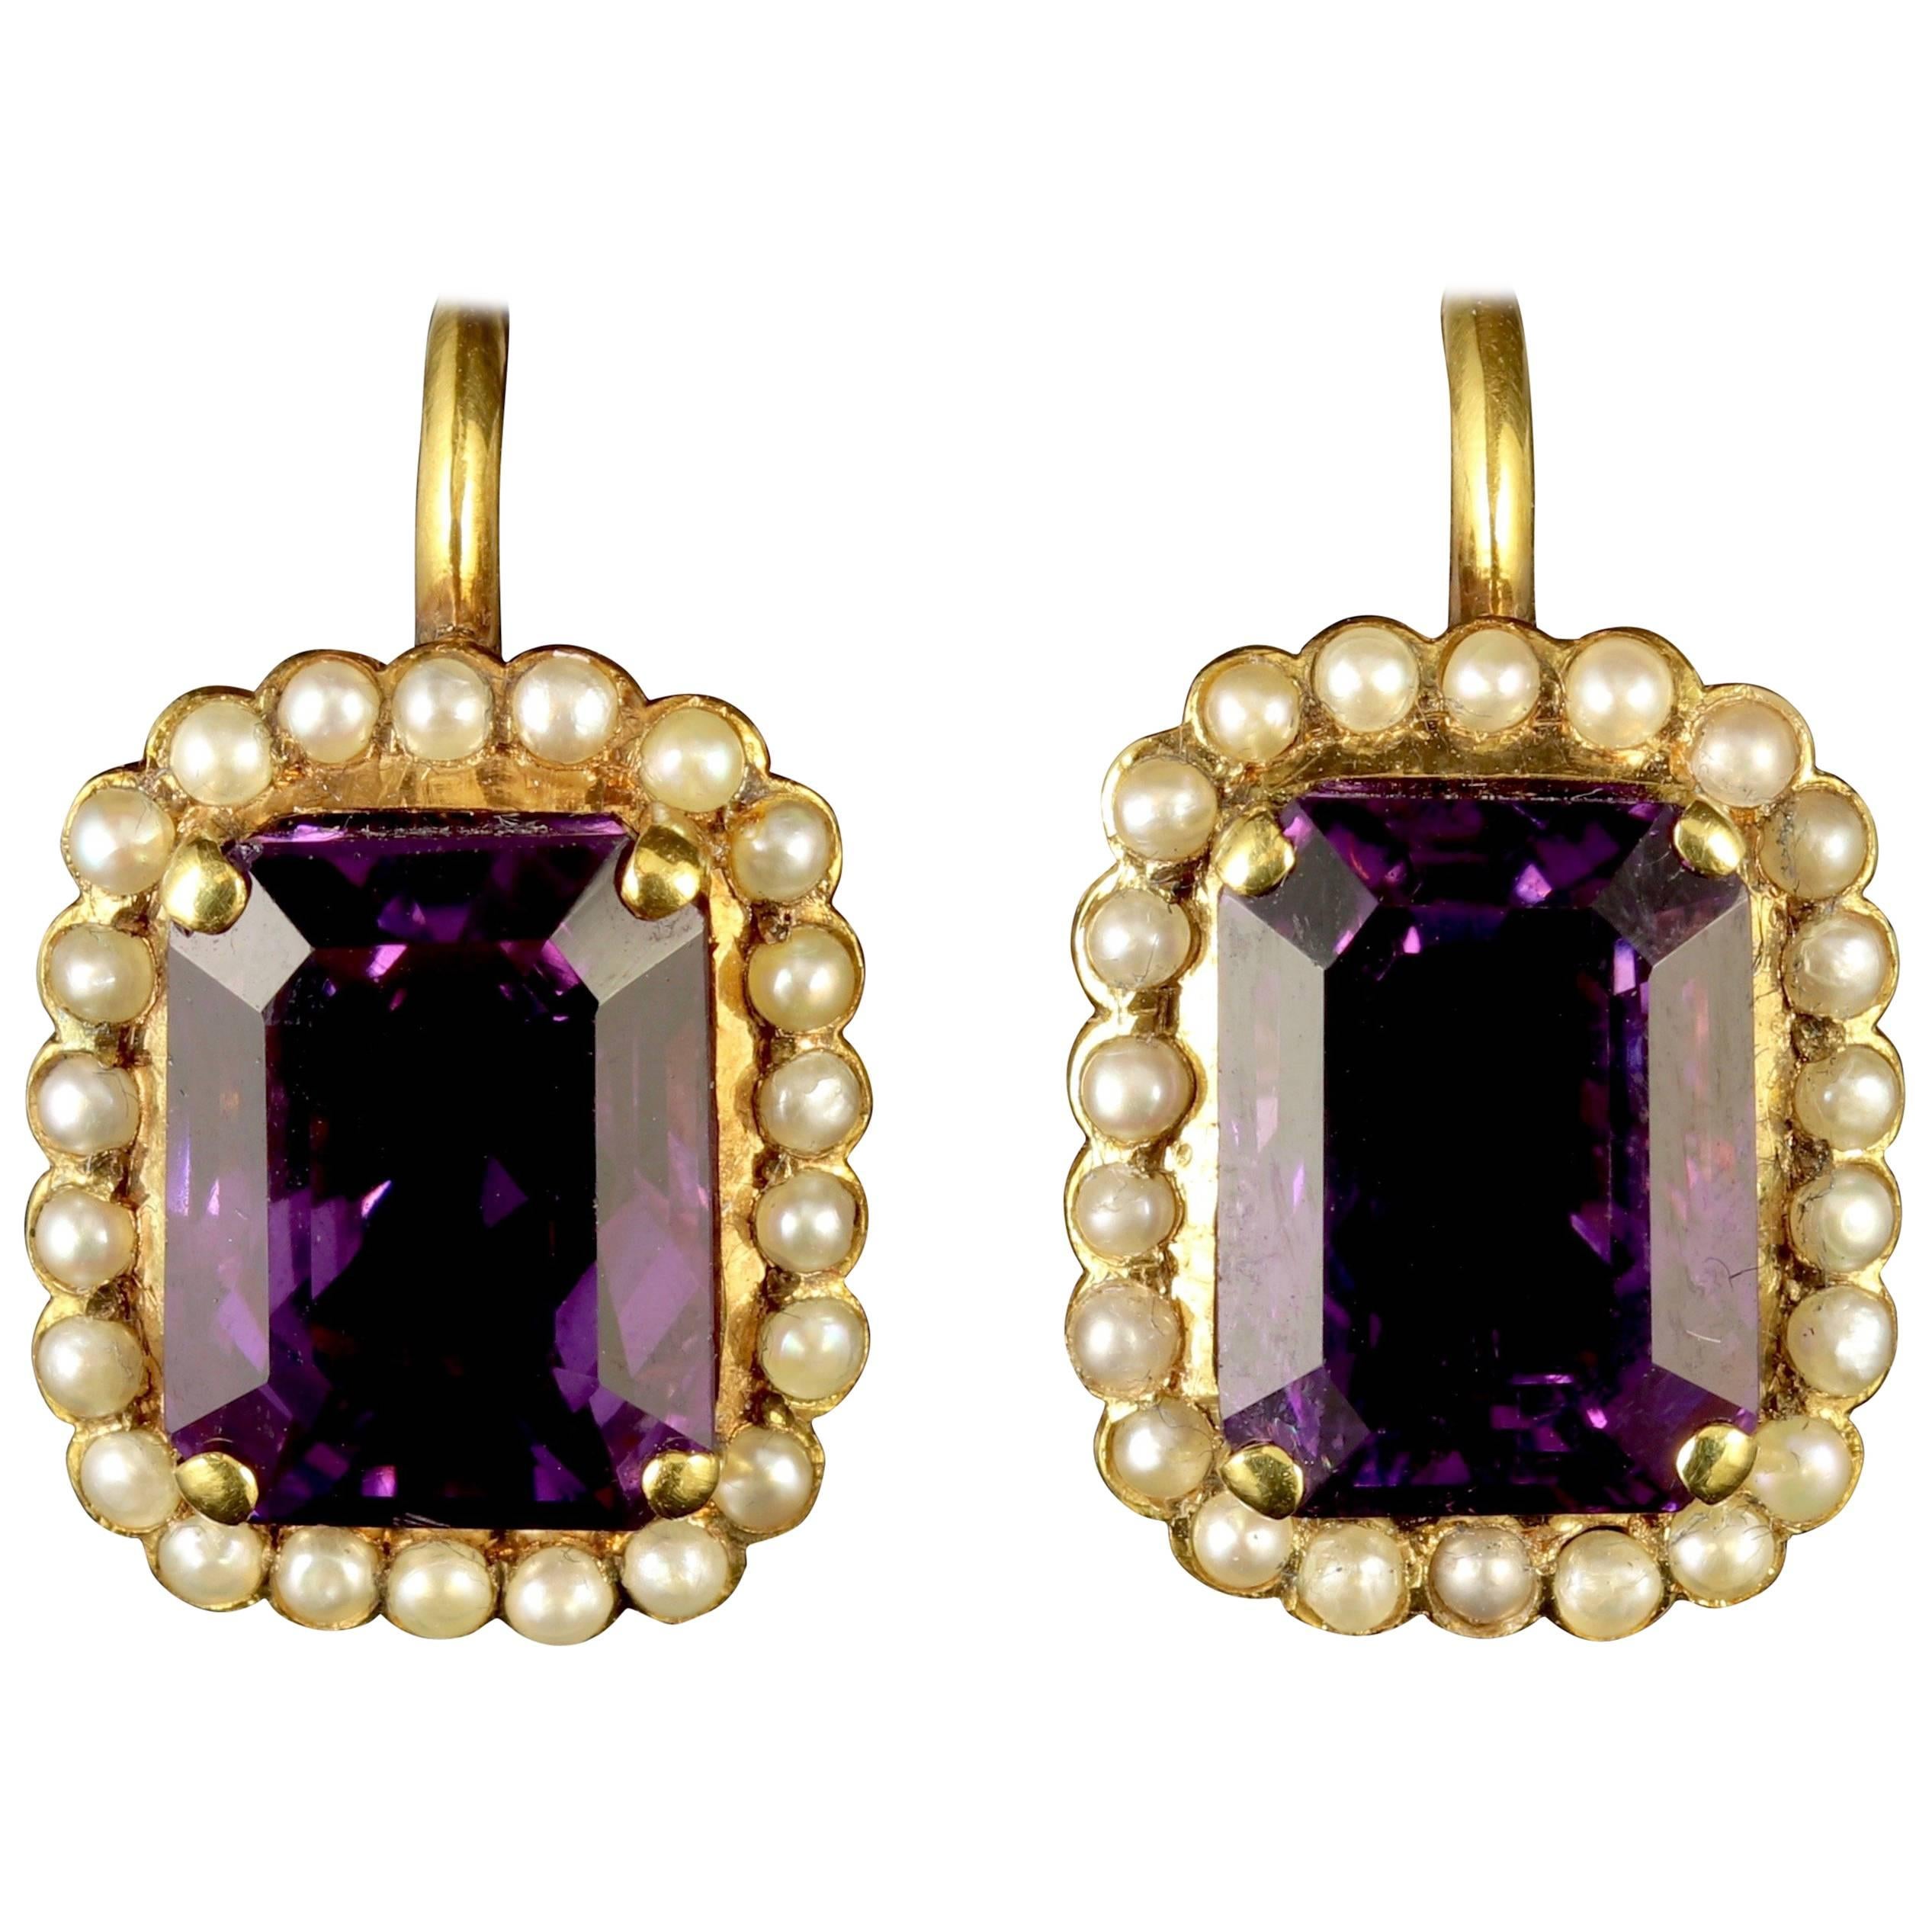 Antique Victorian Gold Amethyst Pearl Earrings 18 Carat Gold, circa 1900